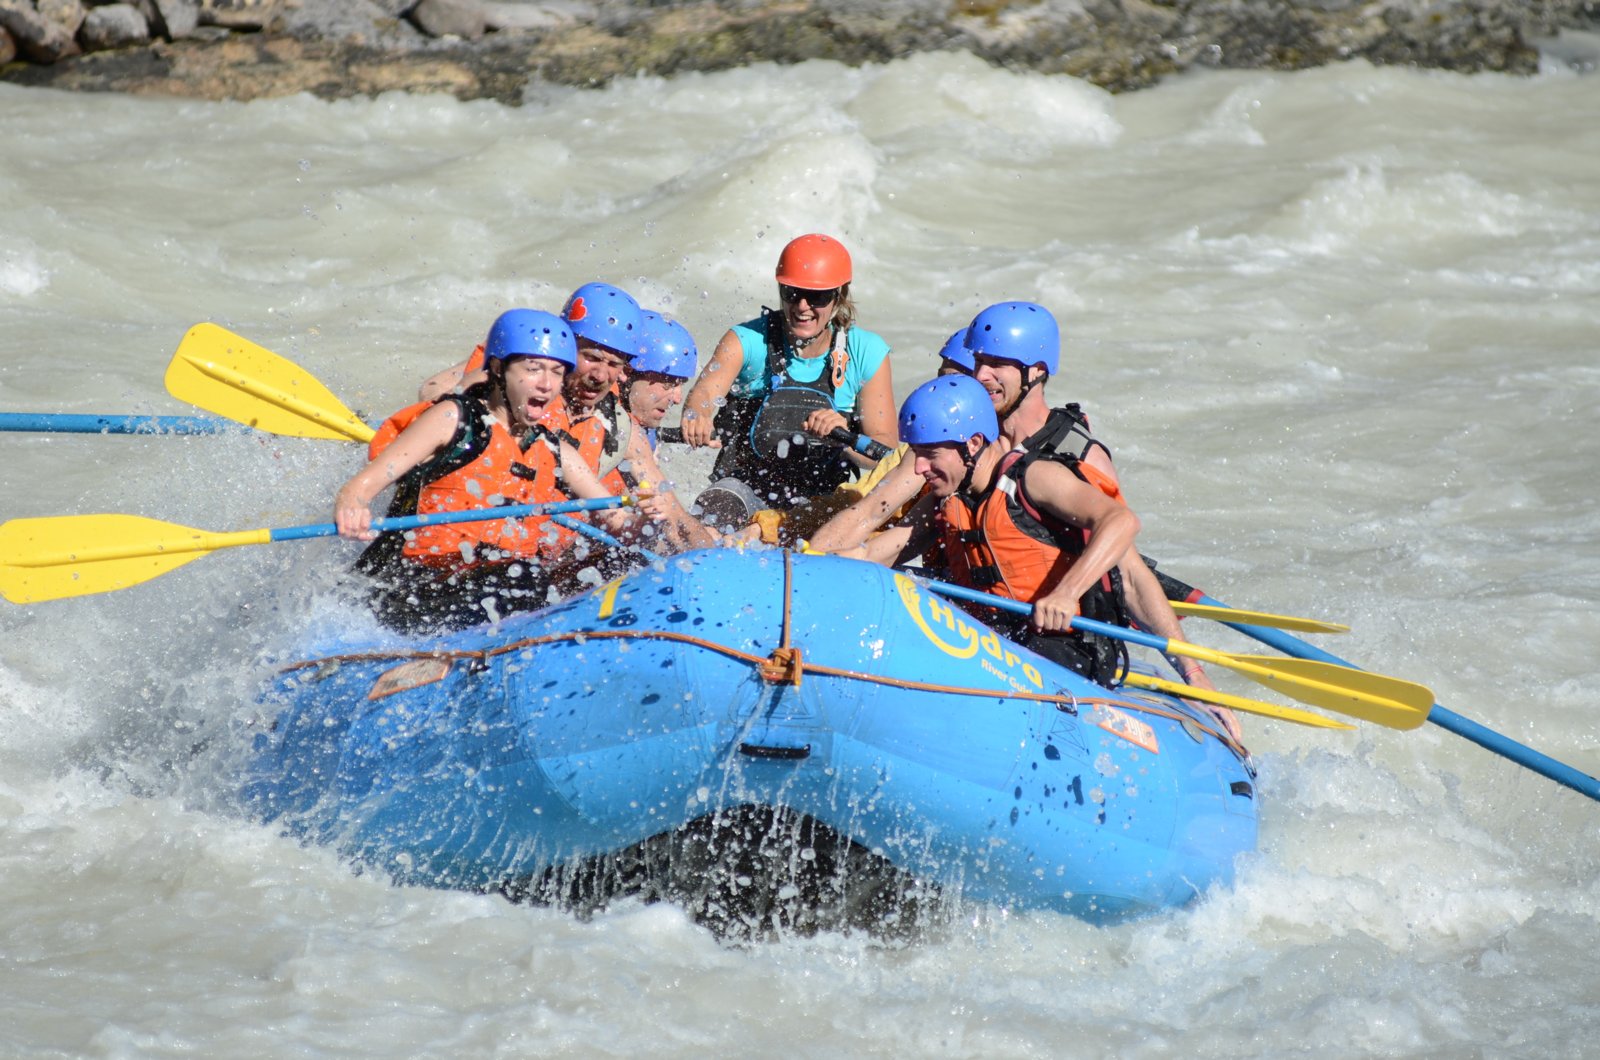 A group with a mix of different facial expressions as they whitewater raft down a river.